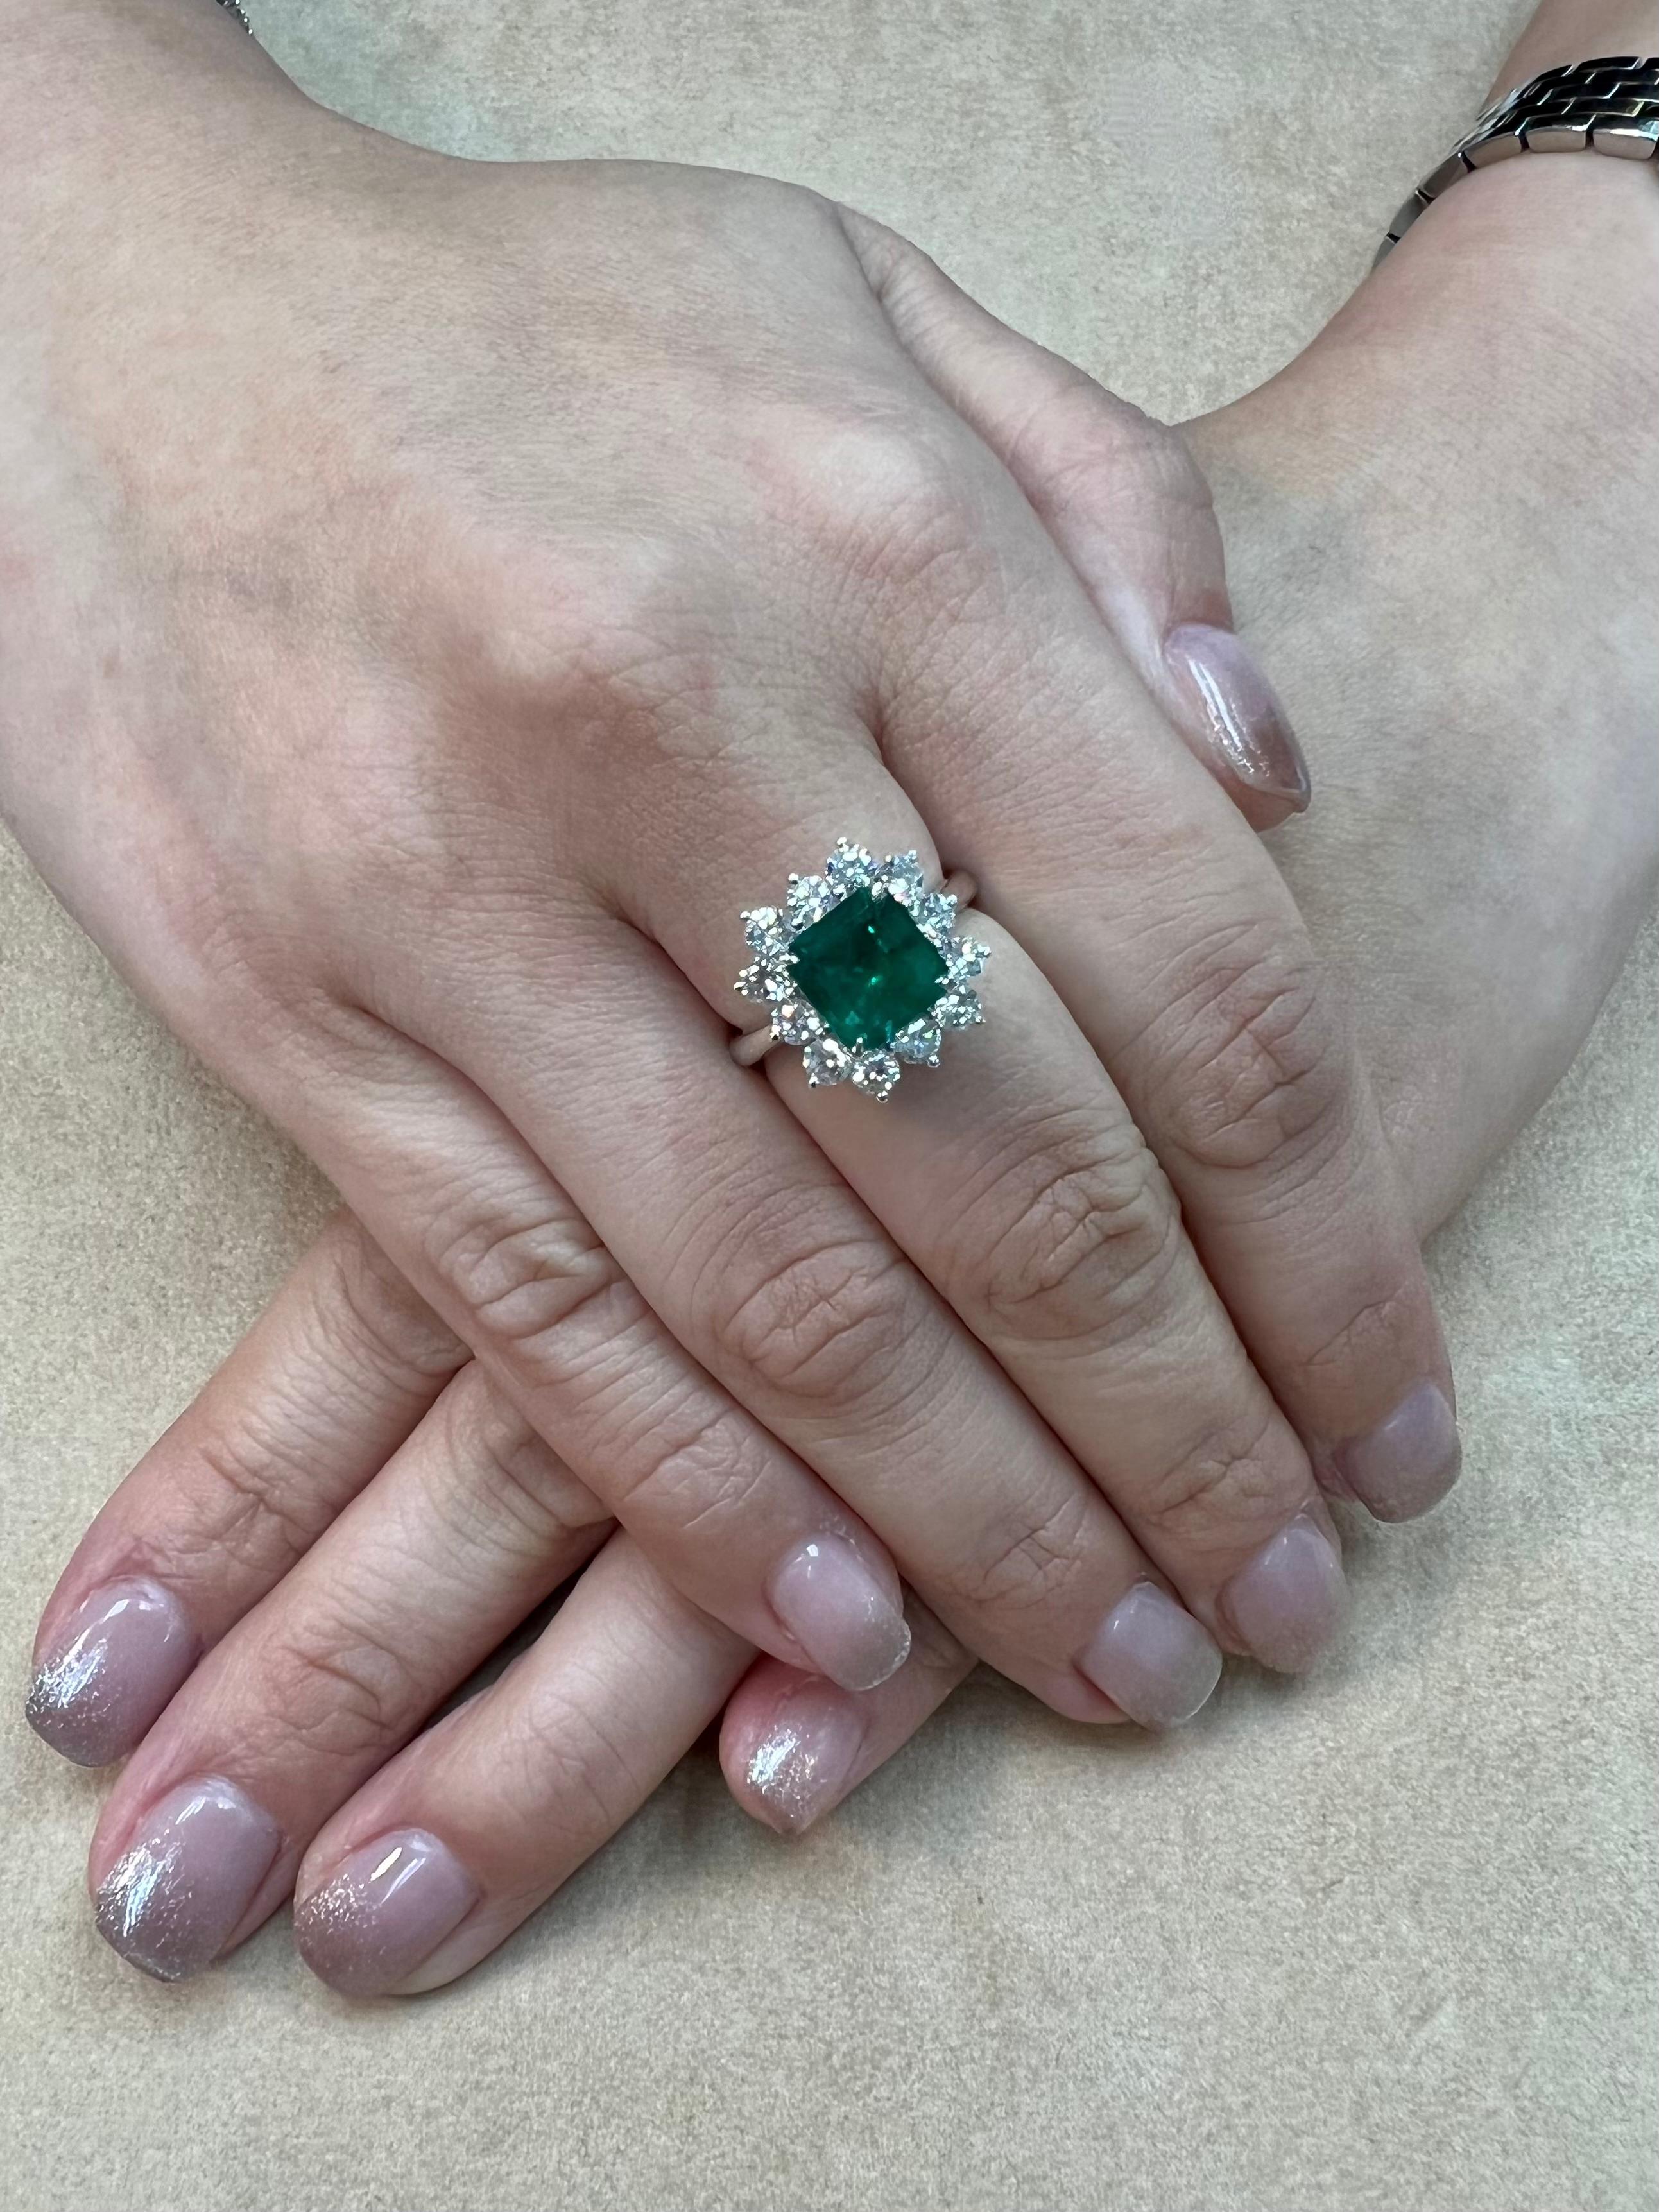 Please check out the HD video. This ring looks much much better in person! This emerald is GRS certified 2.15 cts, insignificant oil. The emerald is impressive enough for GRS to attach a SPECIAL APPENDIX stating its importance! (please see last